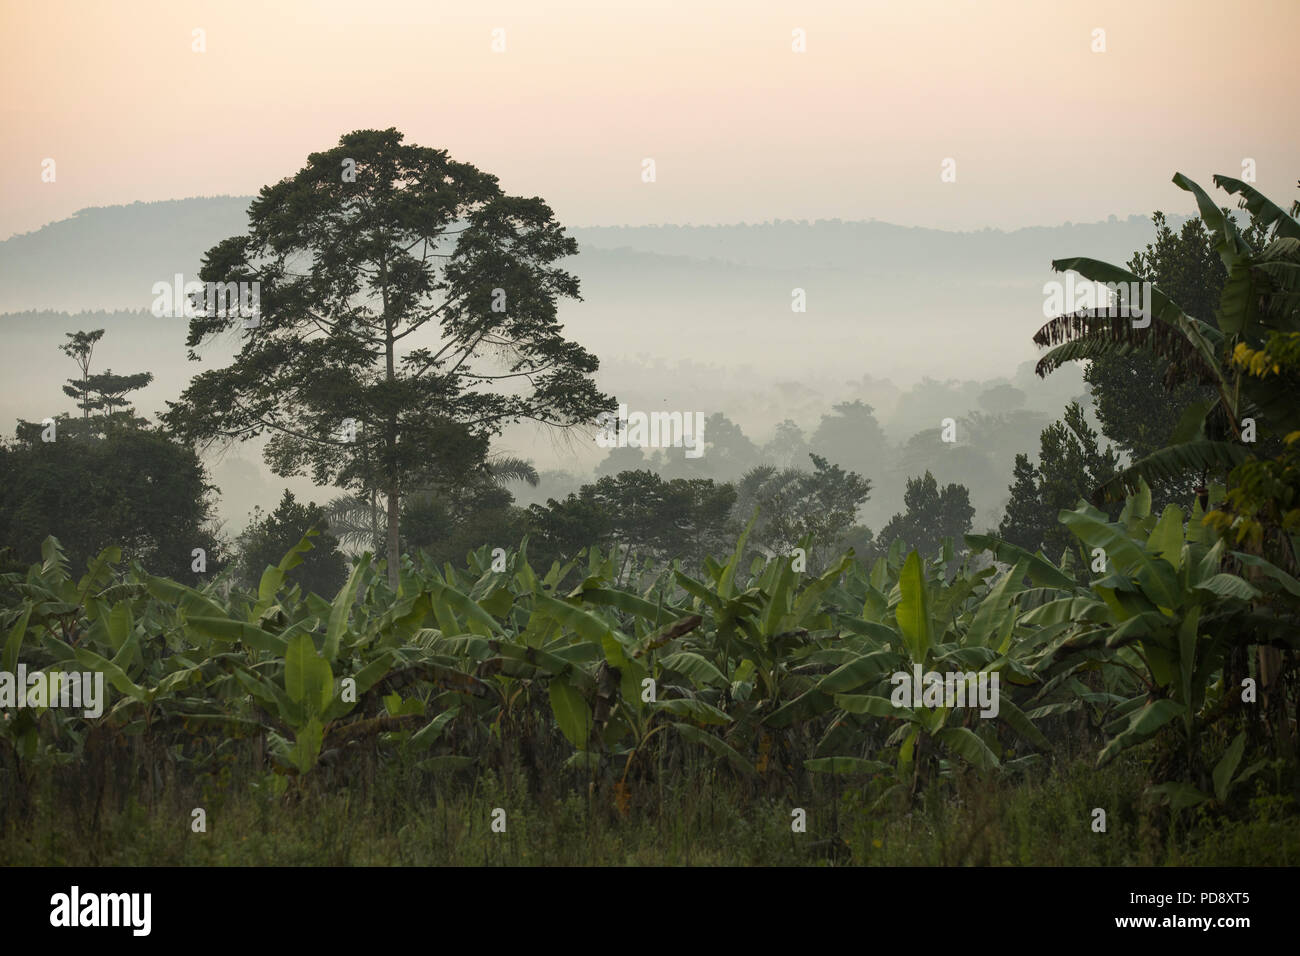 Early morning mist blankets the forested hillsides of Mukono District, Uganda. Stock Photo